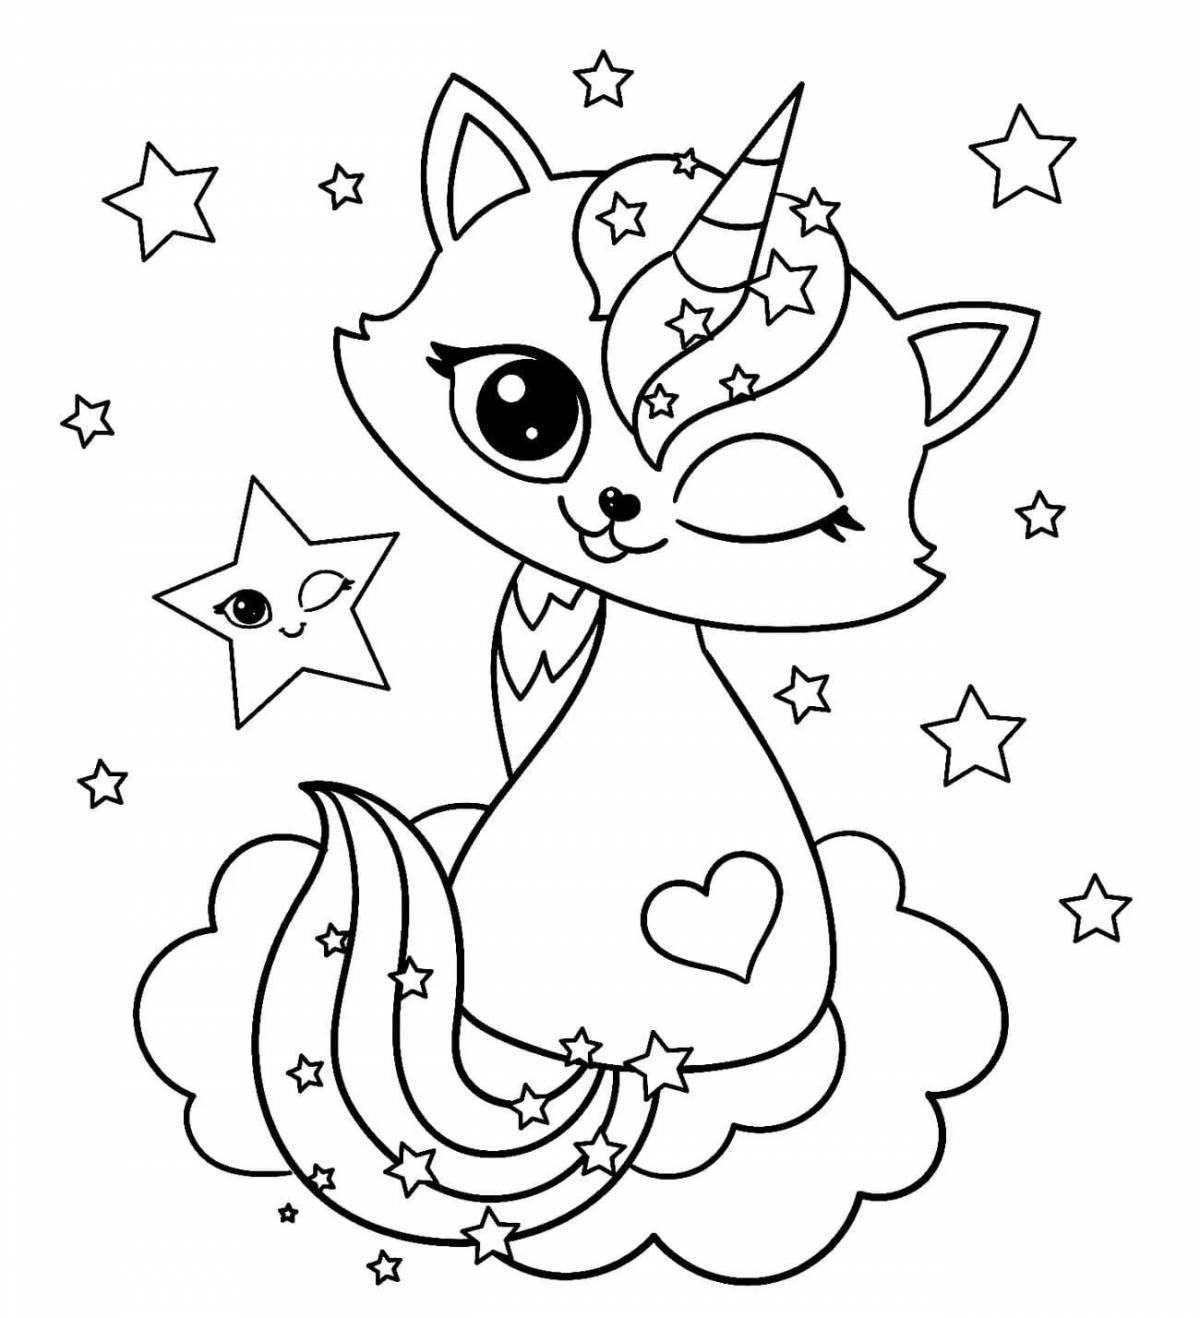 Adorable rainbow cat unicorn coloring page